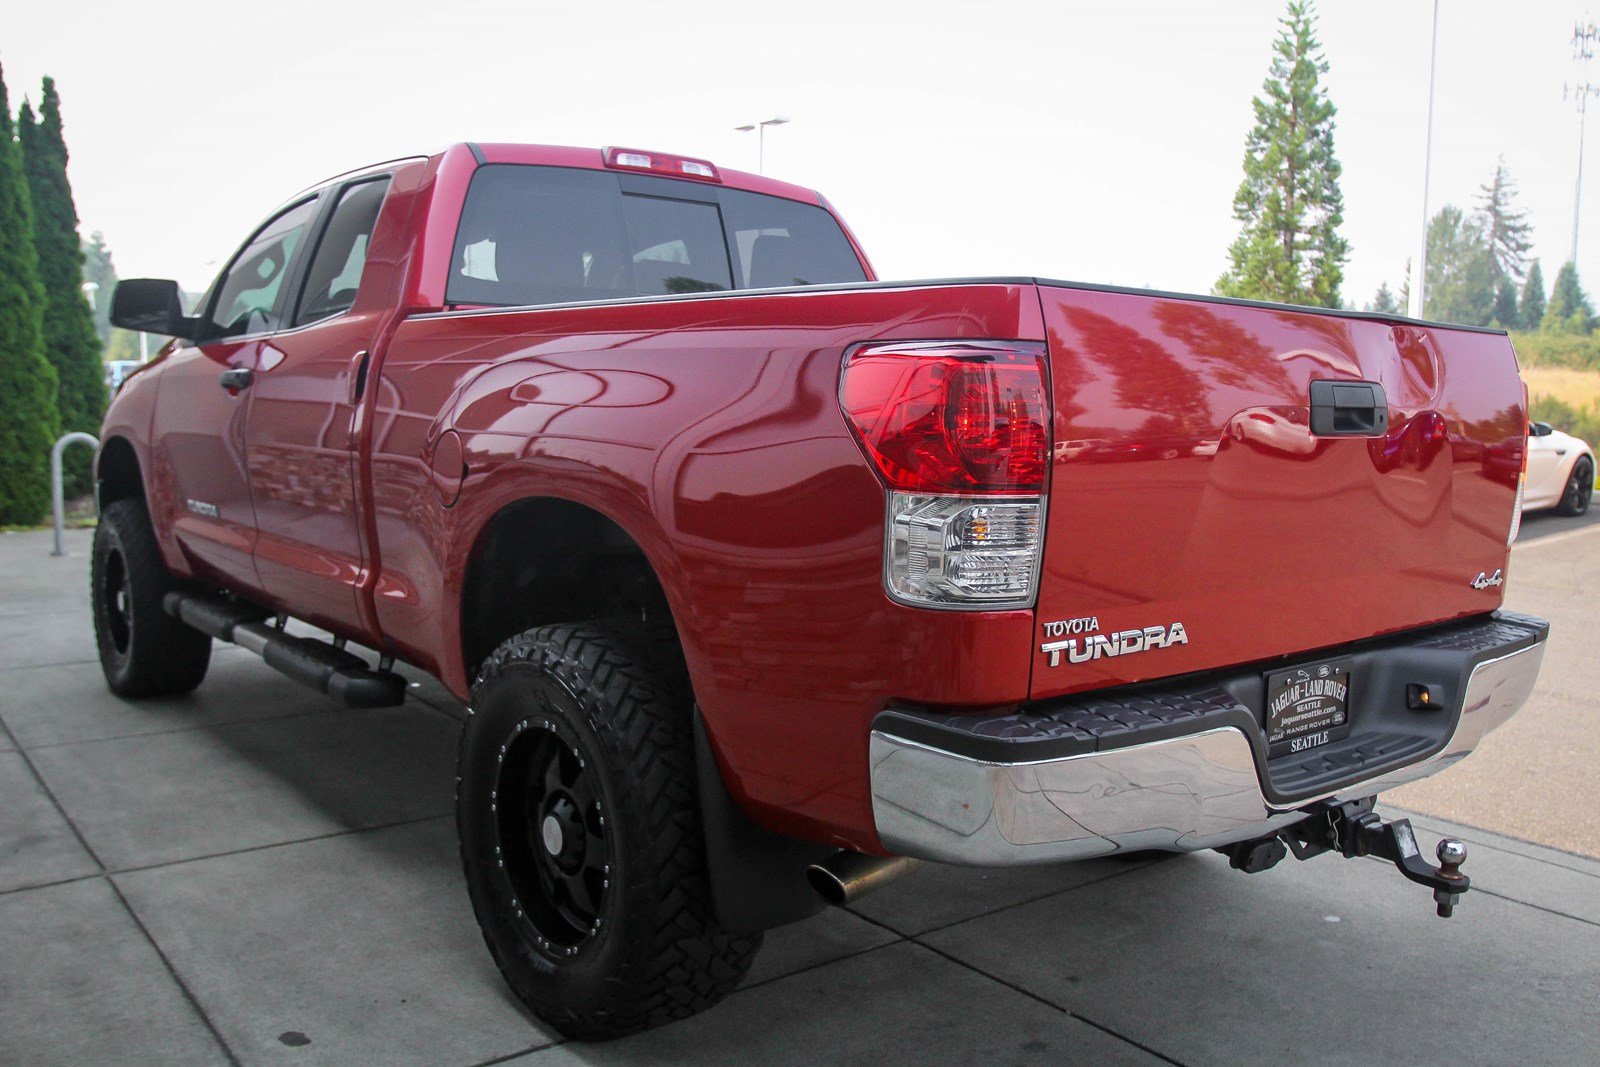 Pre-Owned 2013 Toyota Tundra 4WD Truck DBL 4WD V8 4.6 SR Crew Cab